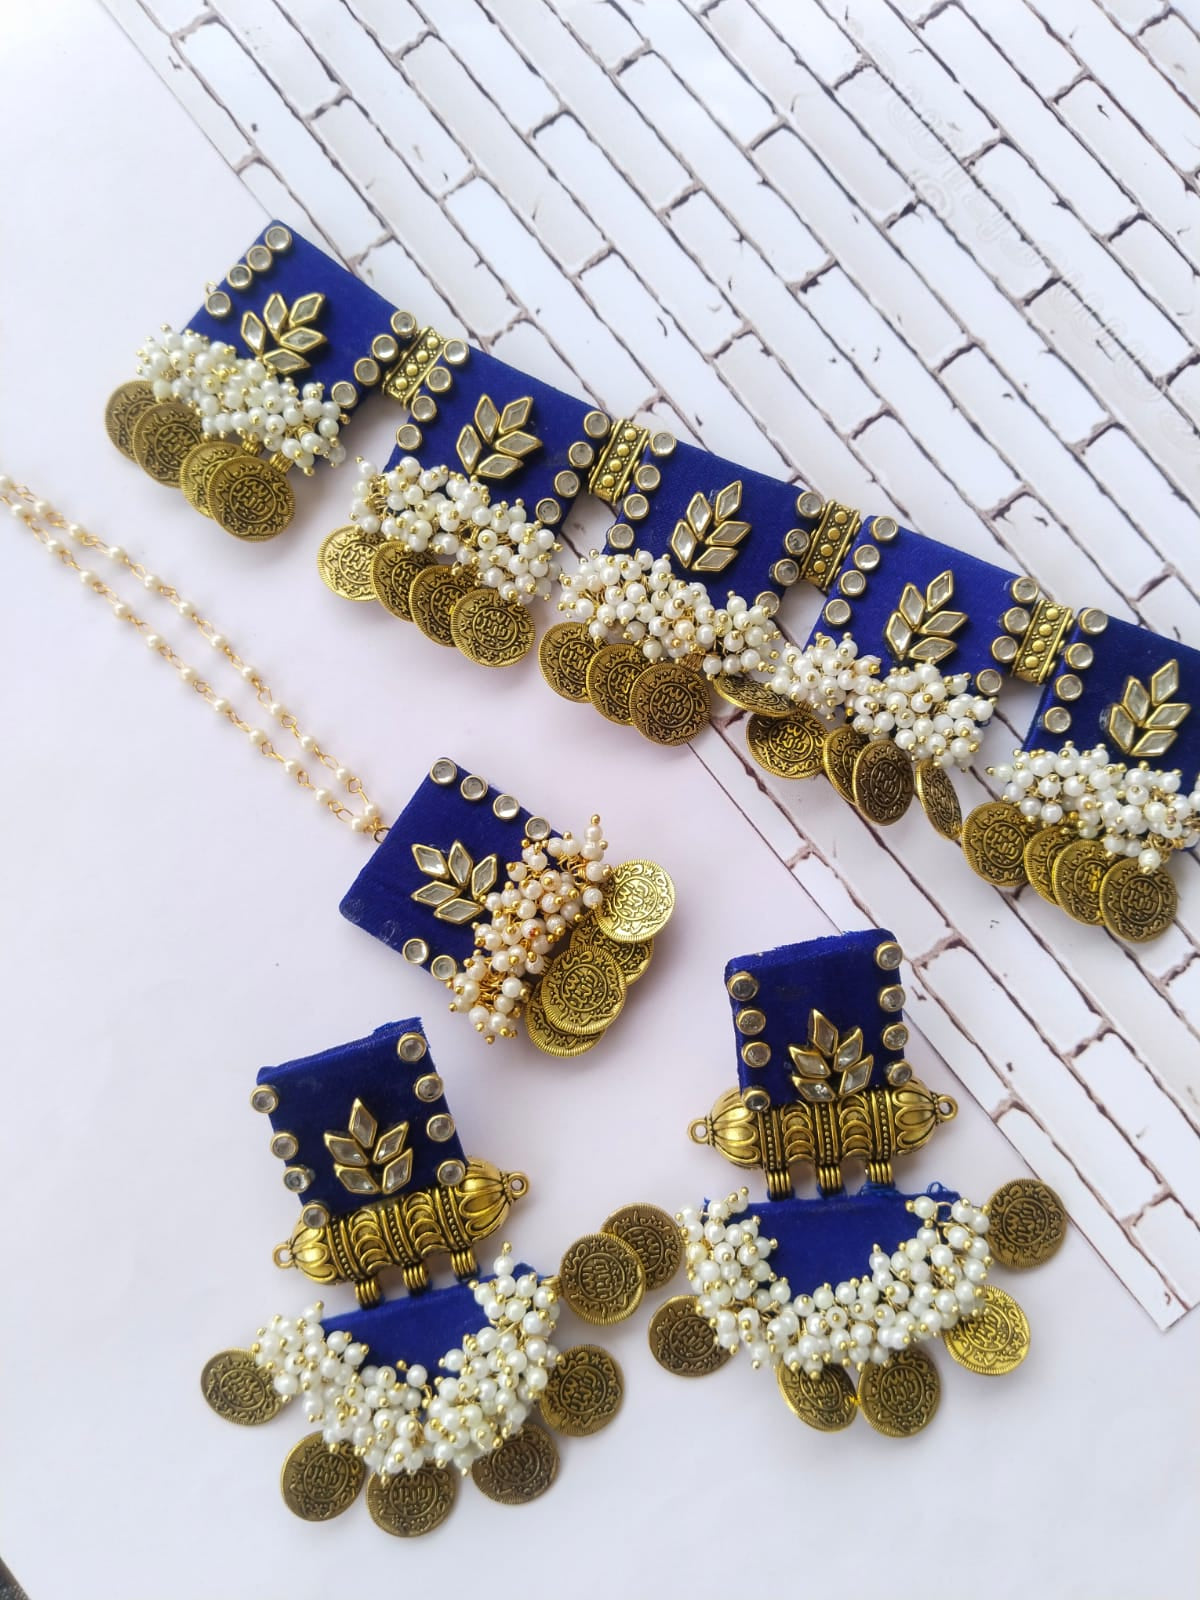 Blue and golden square choker necklace with matching earrings on white backdrop